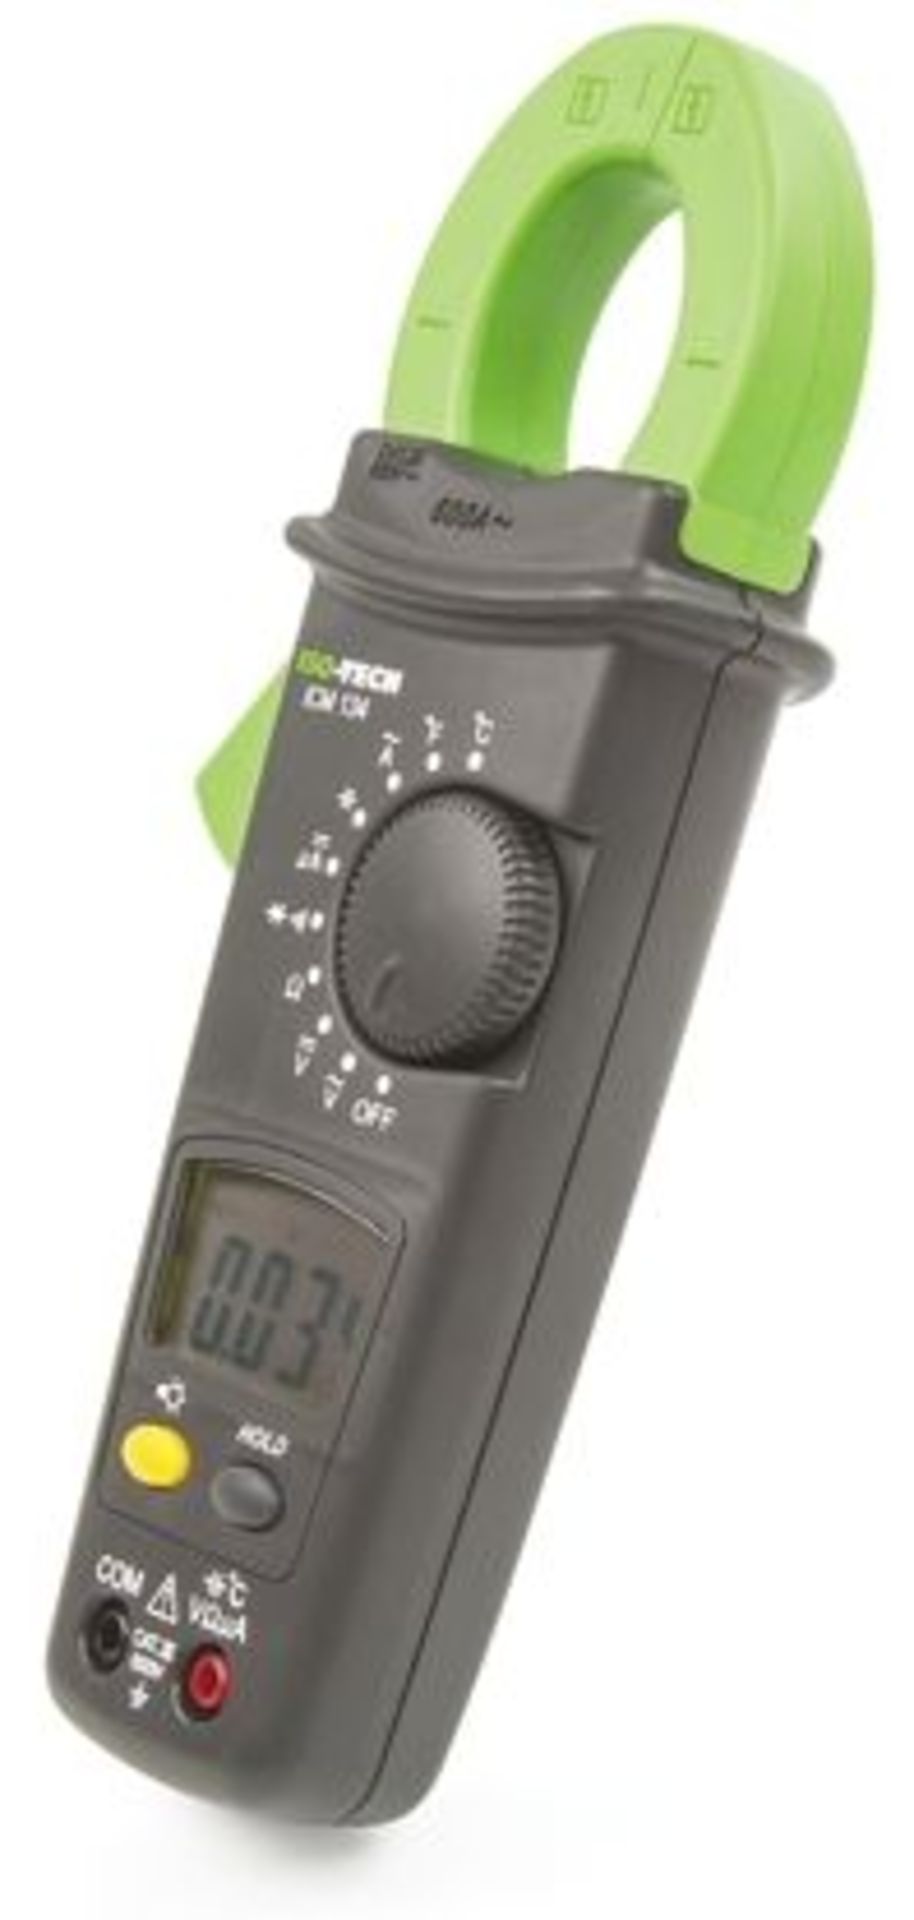 ISO-TECH ICM134 HVAC Clamp Meter, Max Current 600A ac CAT III 600 V